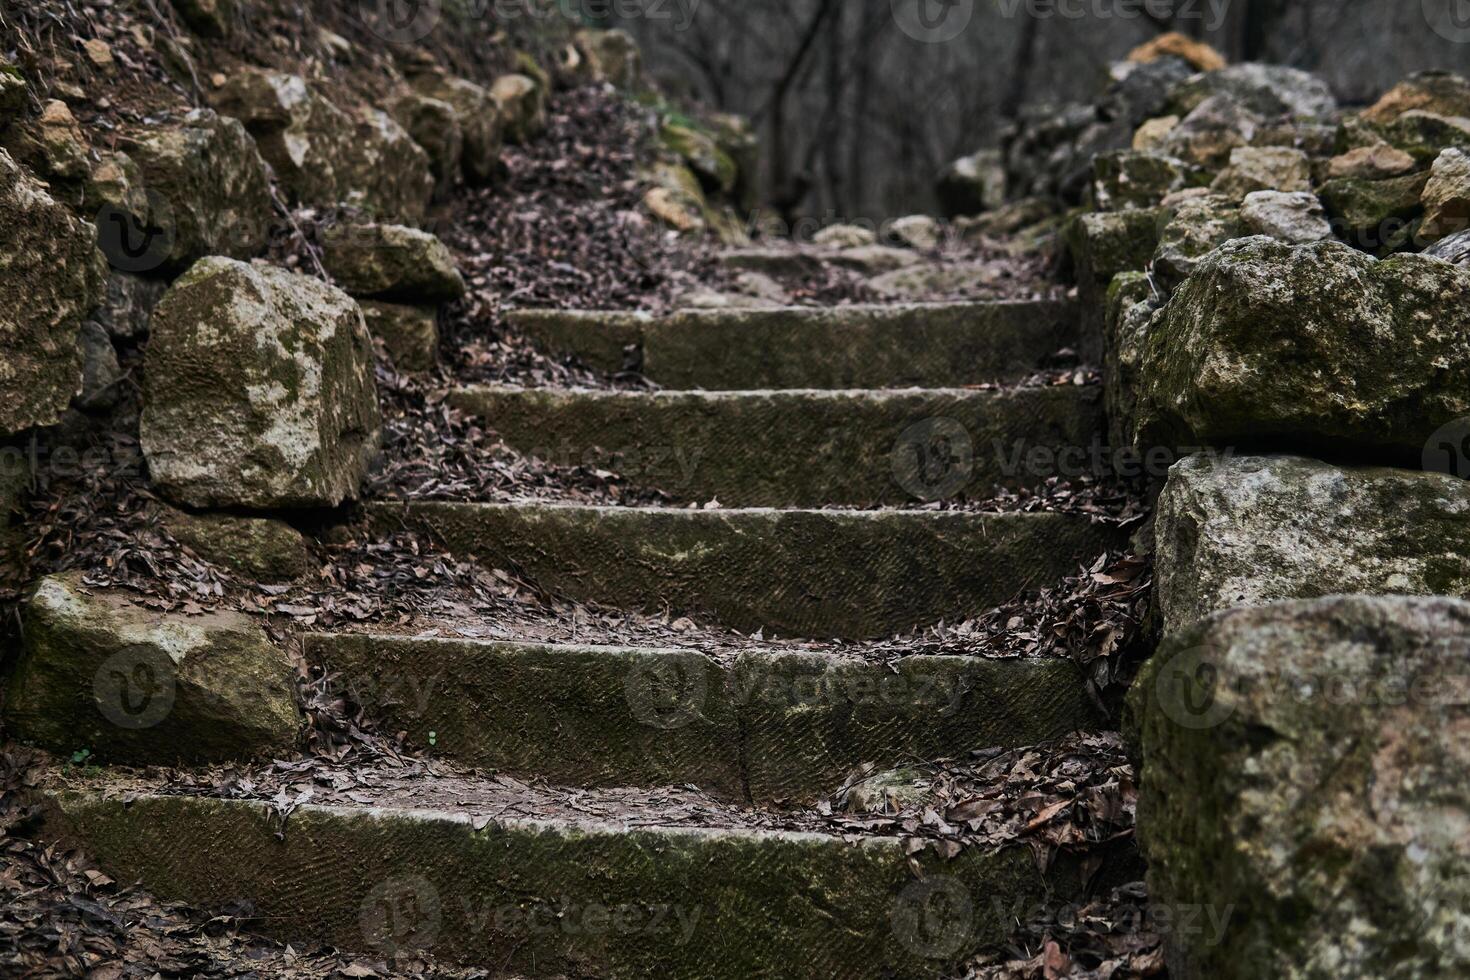 antique staircase made of natural stone in gloomy autumn landscape outdoors photo